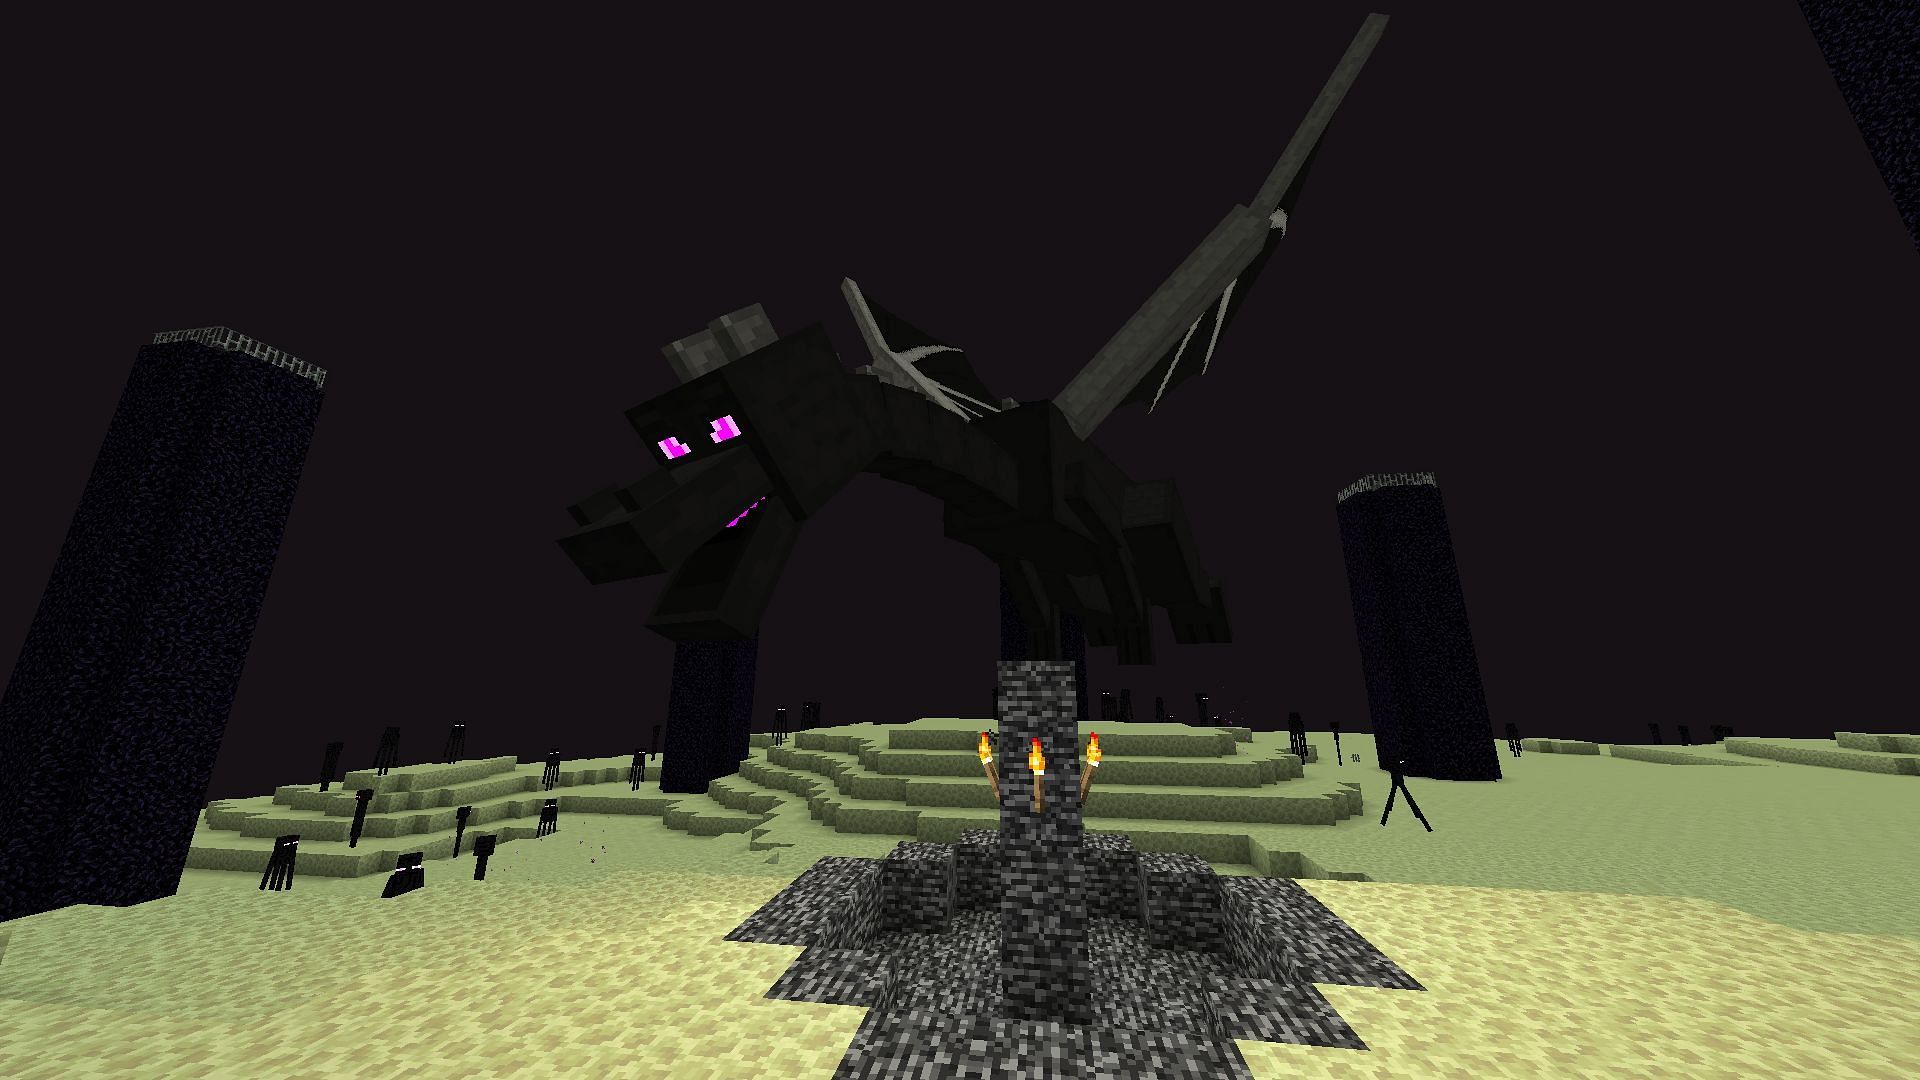 Minecraft player brings the Ender Dragon to the Overworld without cheats